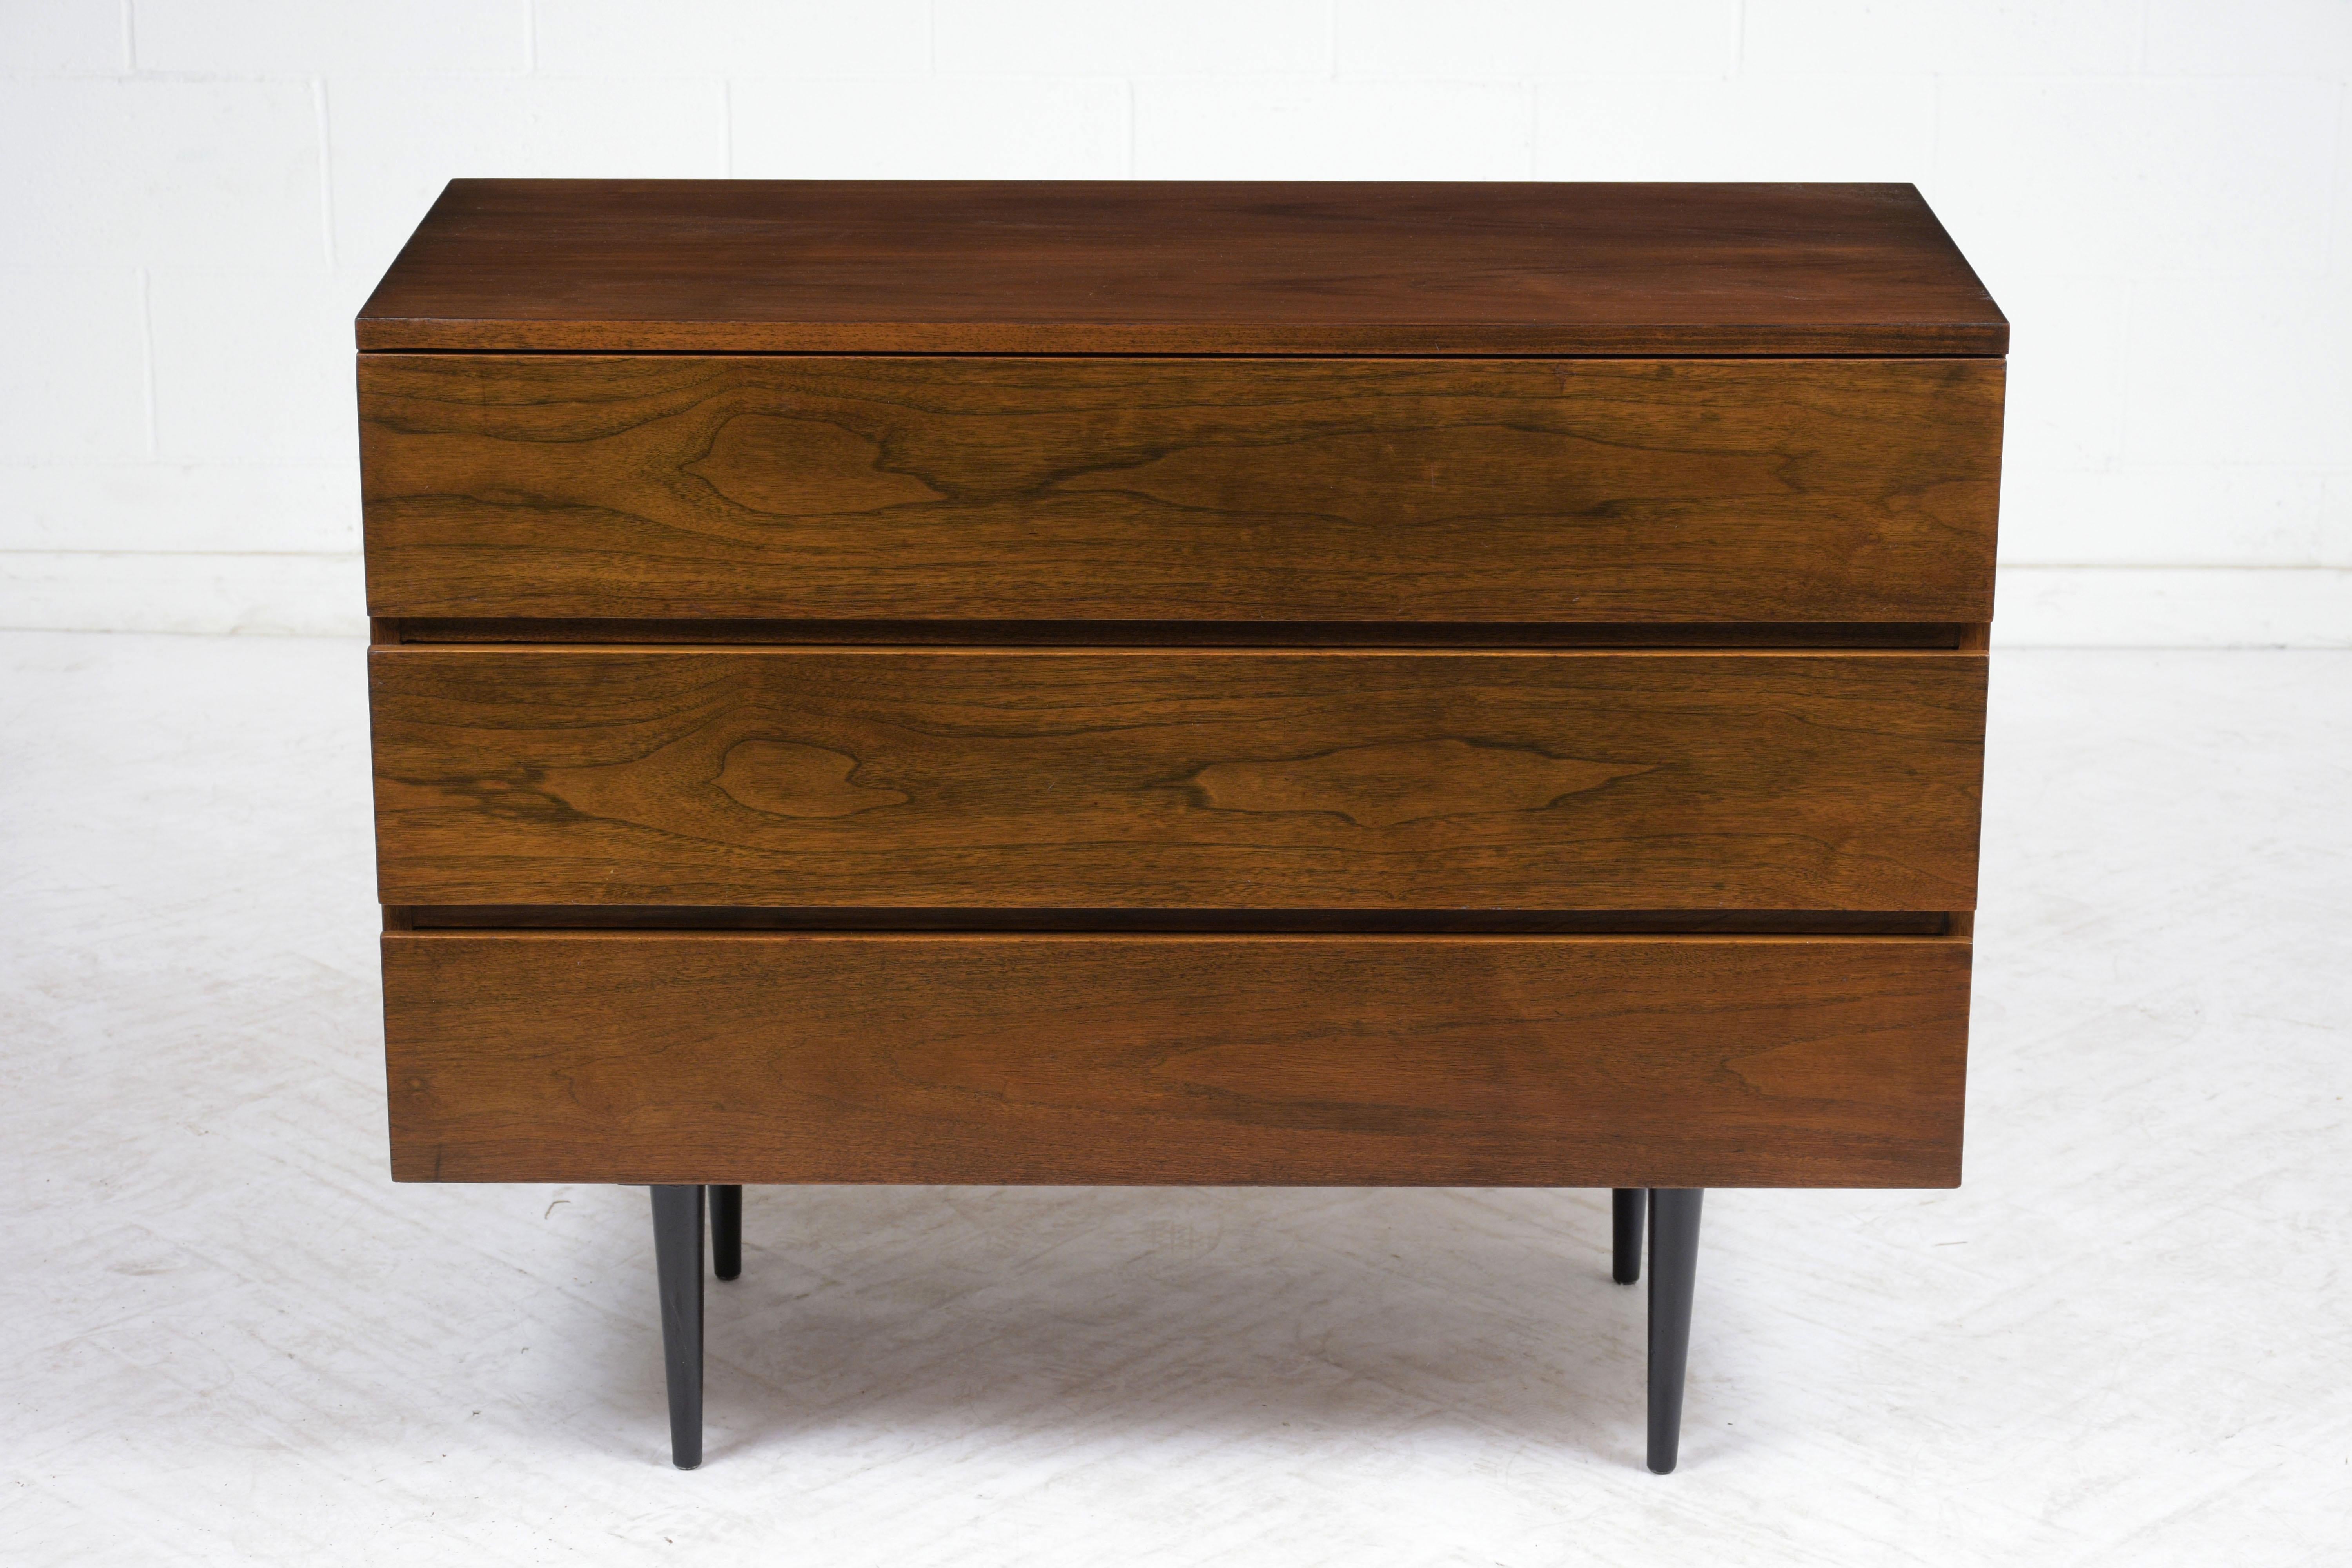 This 1960s Mid-Century Modern style chest of drawers has been completely restored. The chest is a rich walnut color with a lacquered finish. There are three drawers that open with finger notches. The chest is finished with tapered legs finished in a